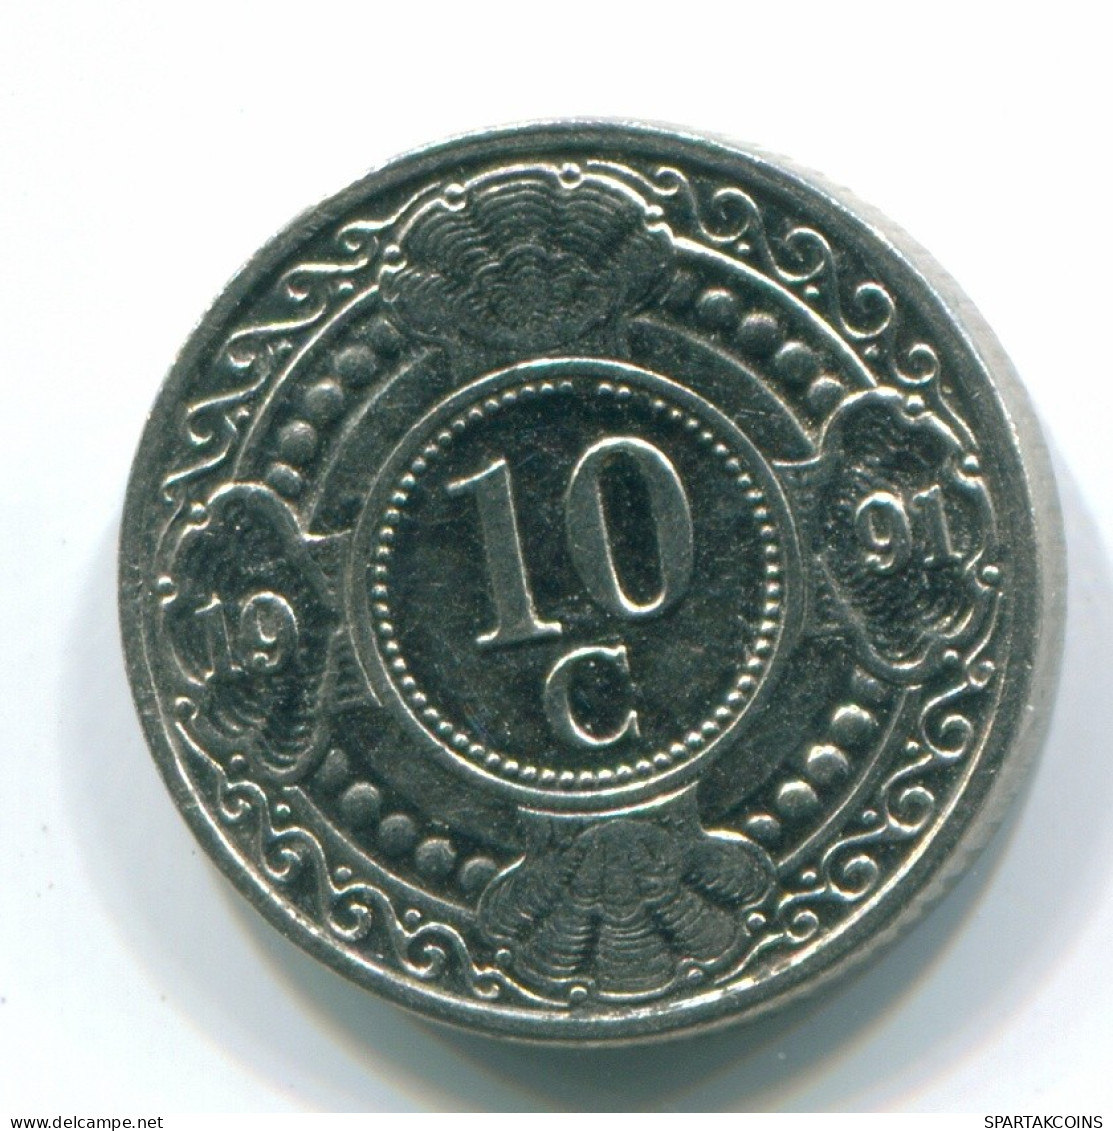 10 CENTS 1991 NETHERLANDS ANTILLES Nickel Colonial Coin #S11328.U.A - Netherlands Antilles